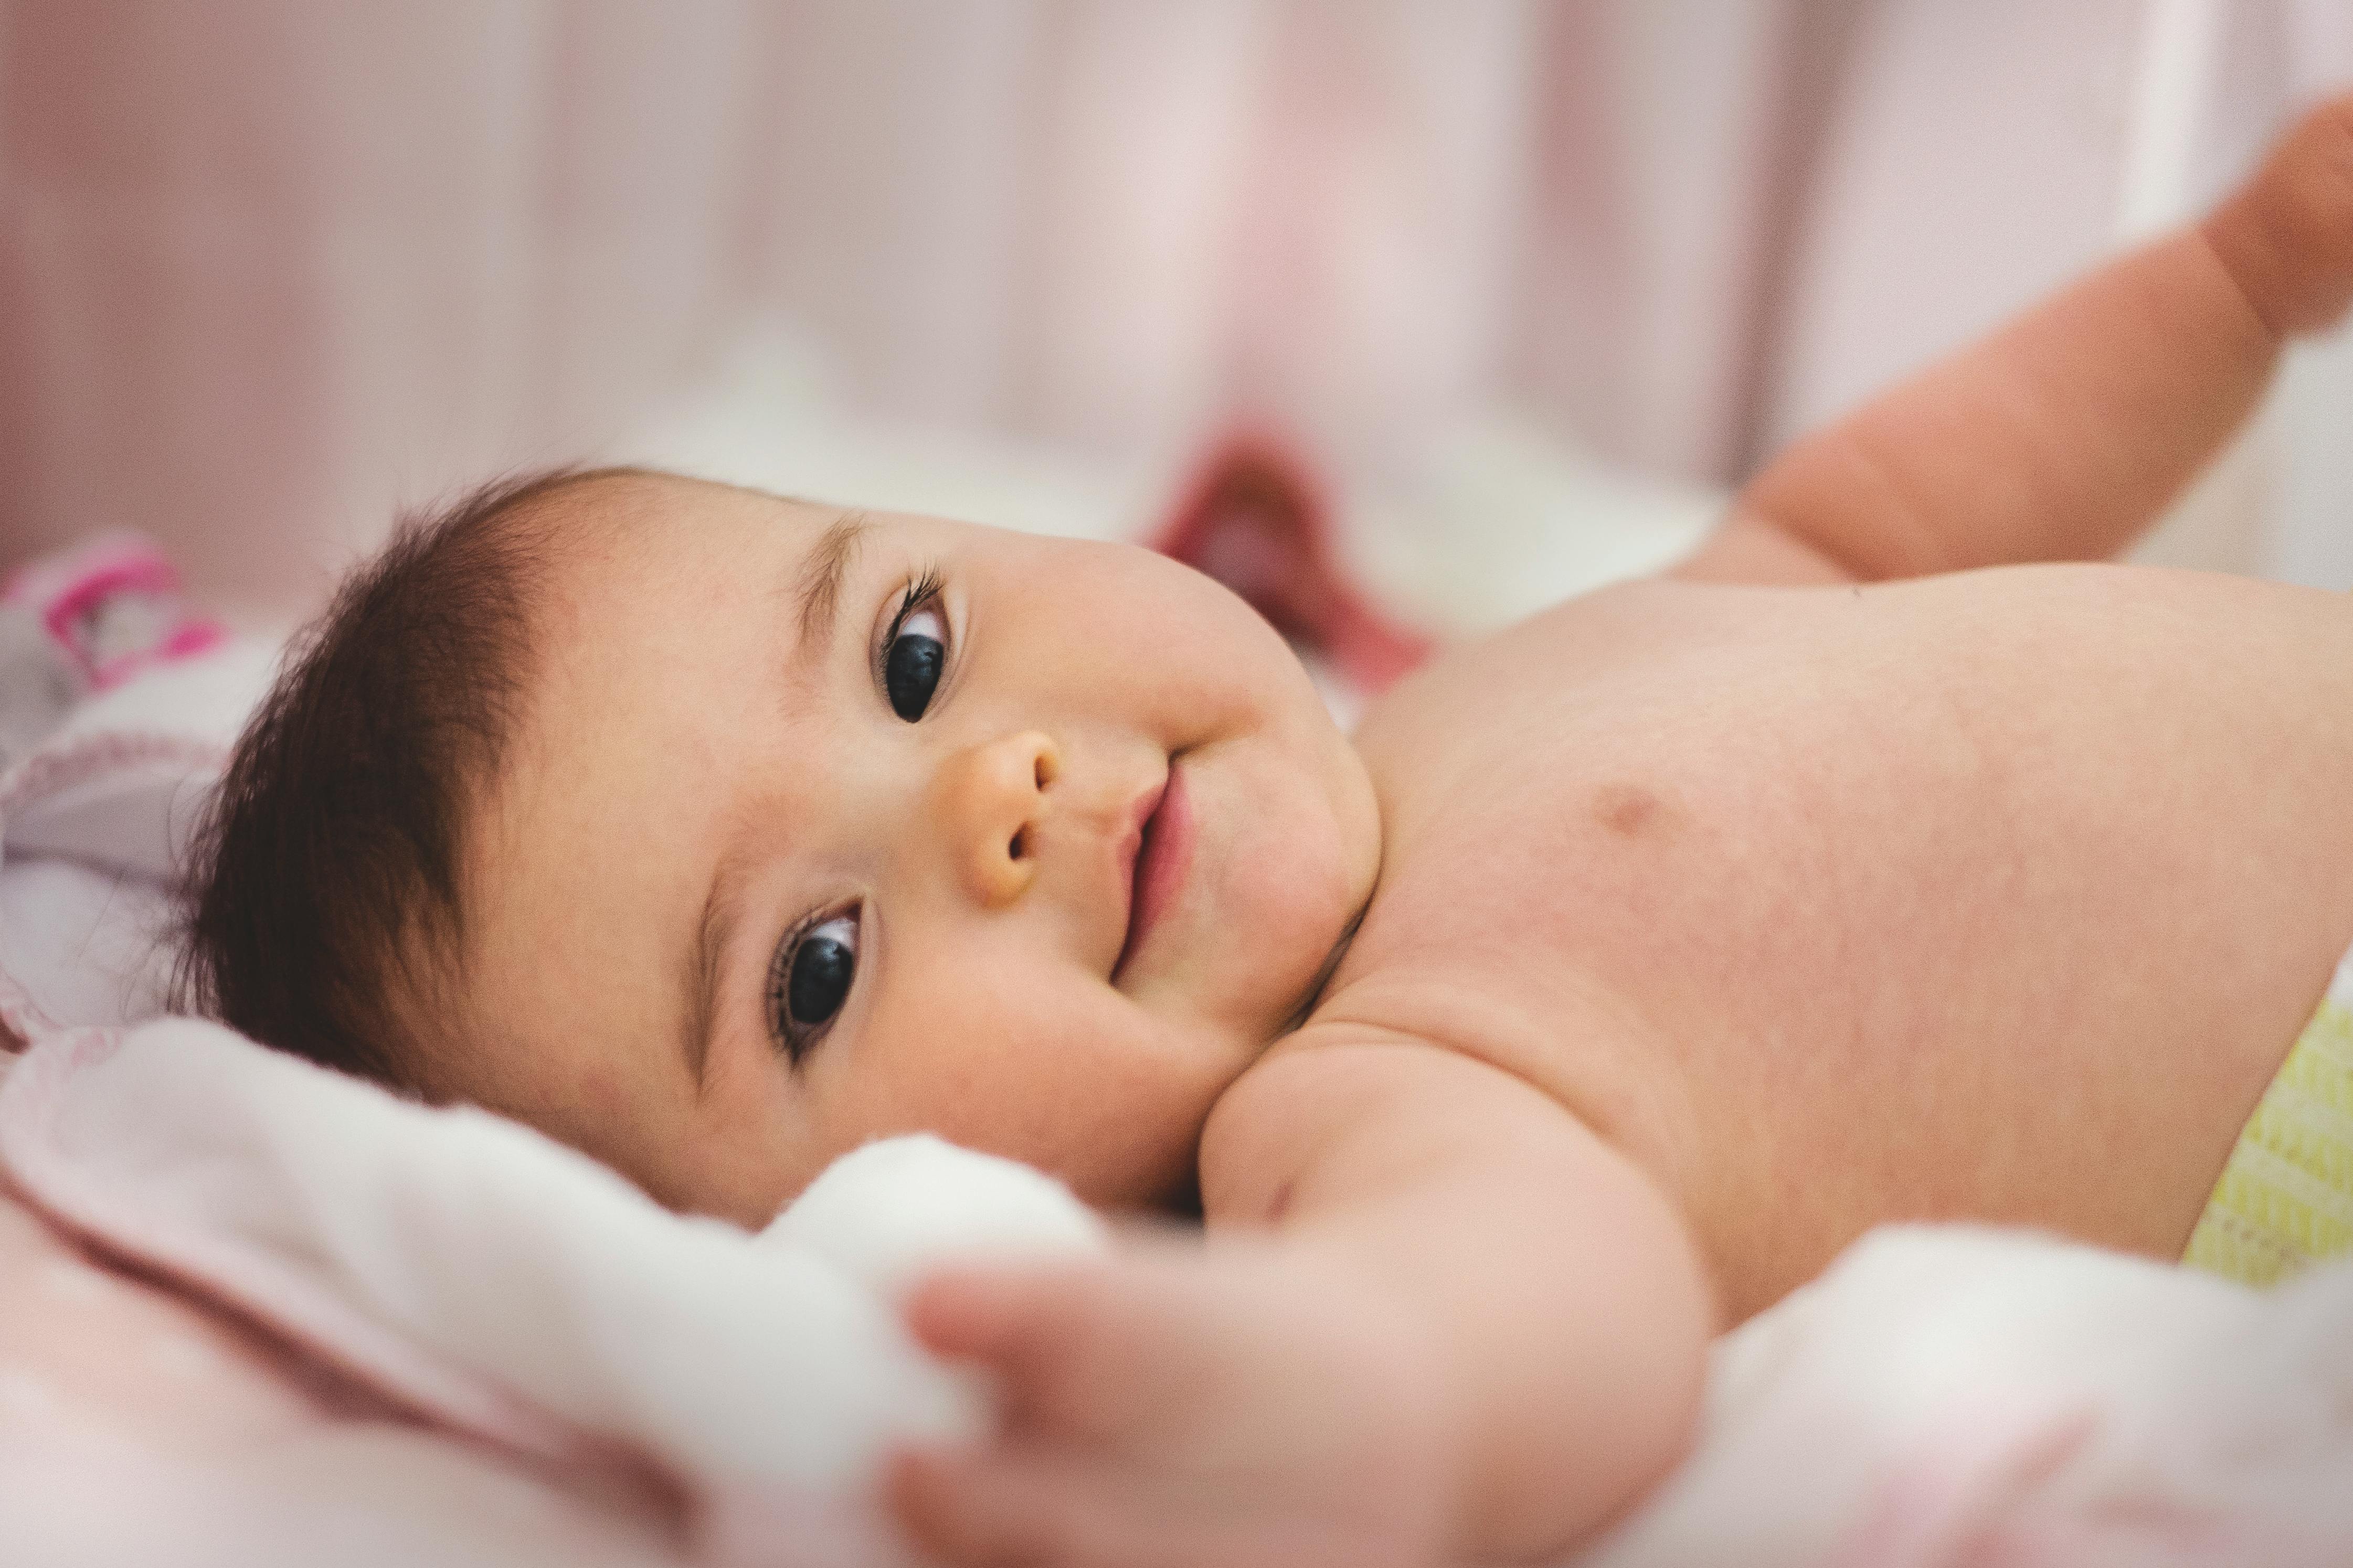 newborn baby photos, download the best free newborn baby stock photos & hd images